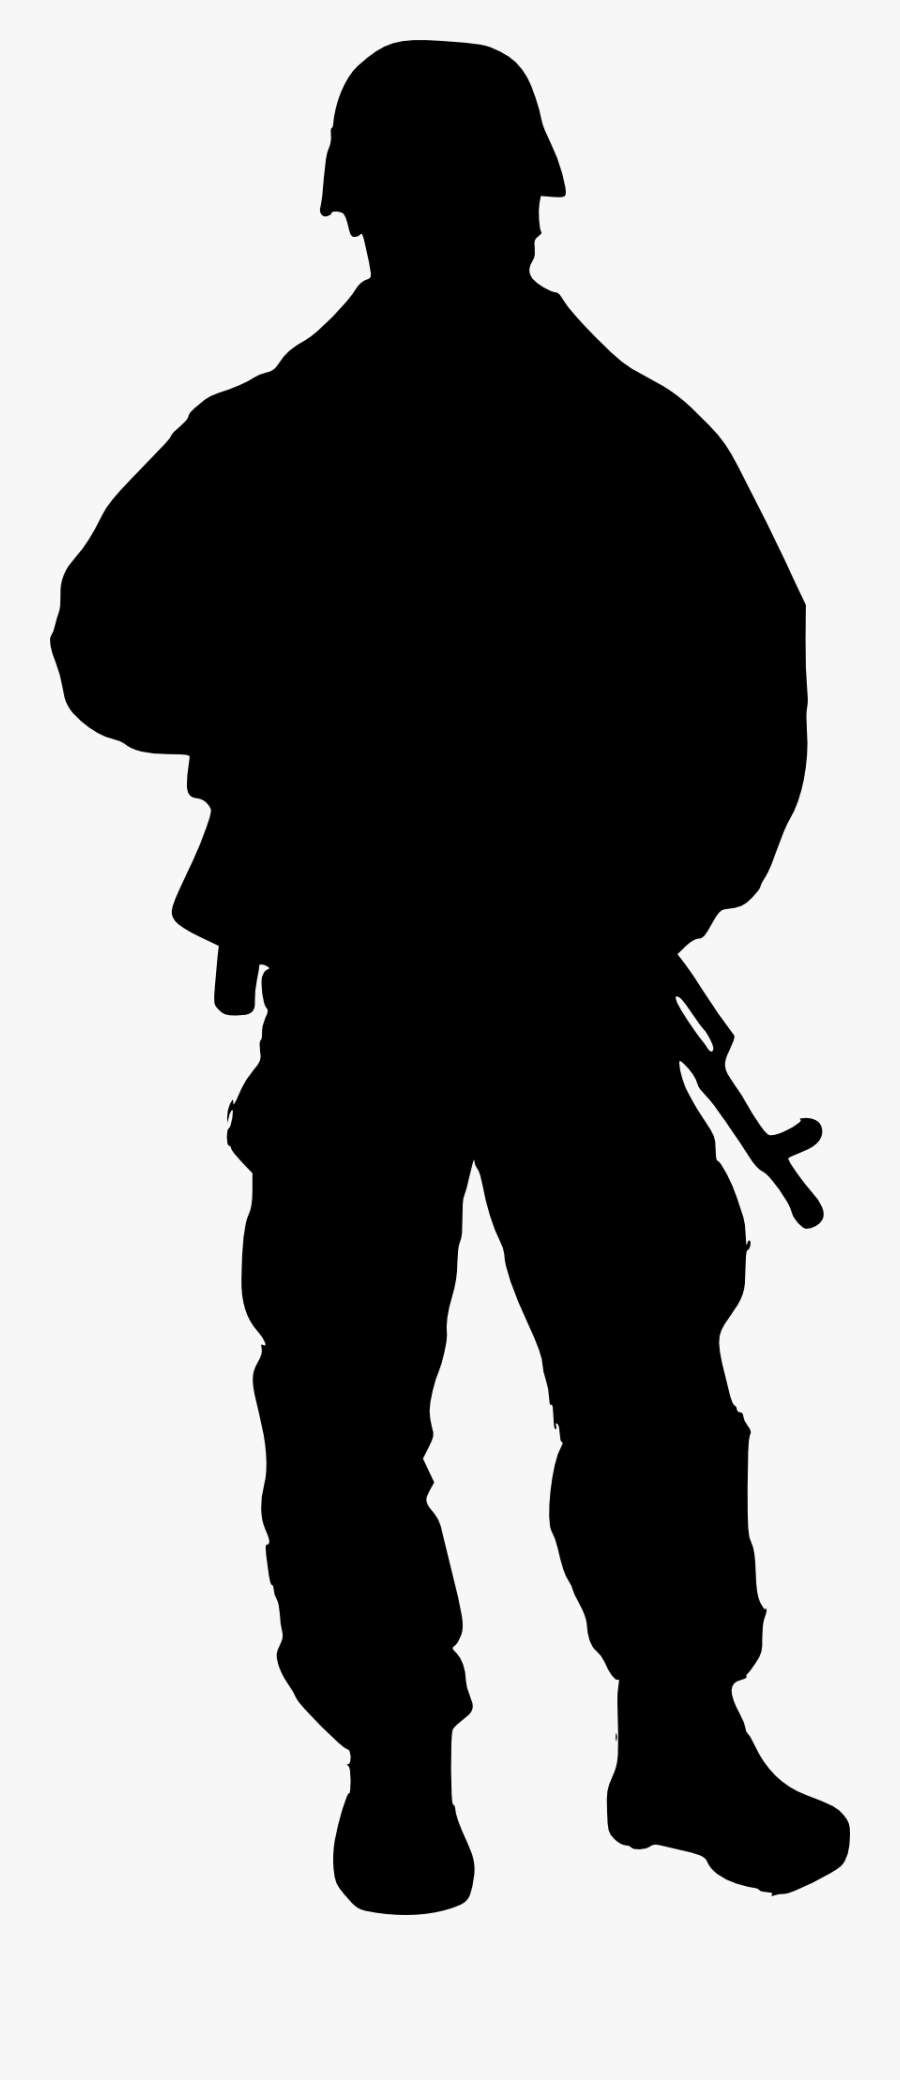 Silhouette Of A Soldier - Black And White Soldier In Silhouette, Transparent Clipart